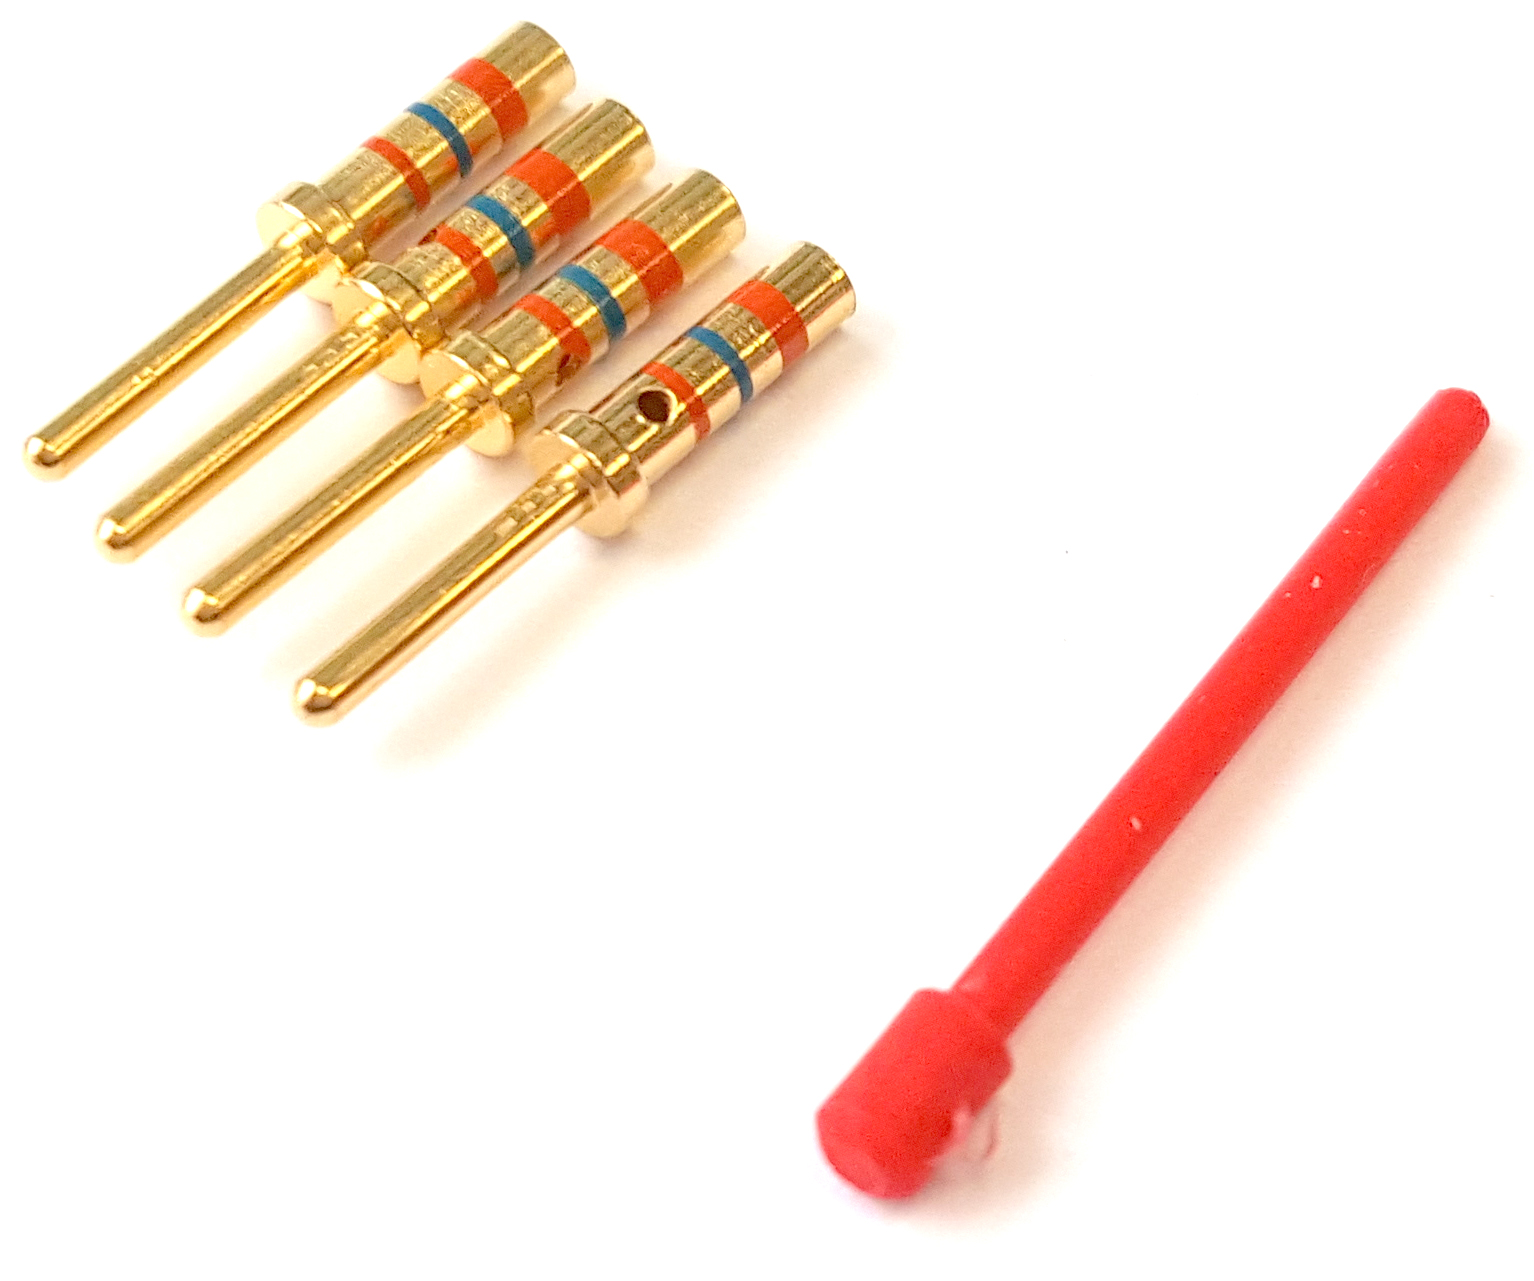 Amphenol Military 3-Pin Connector With Gold Crimp Pins D38999/26MA98PN